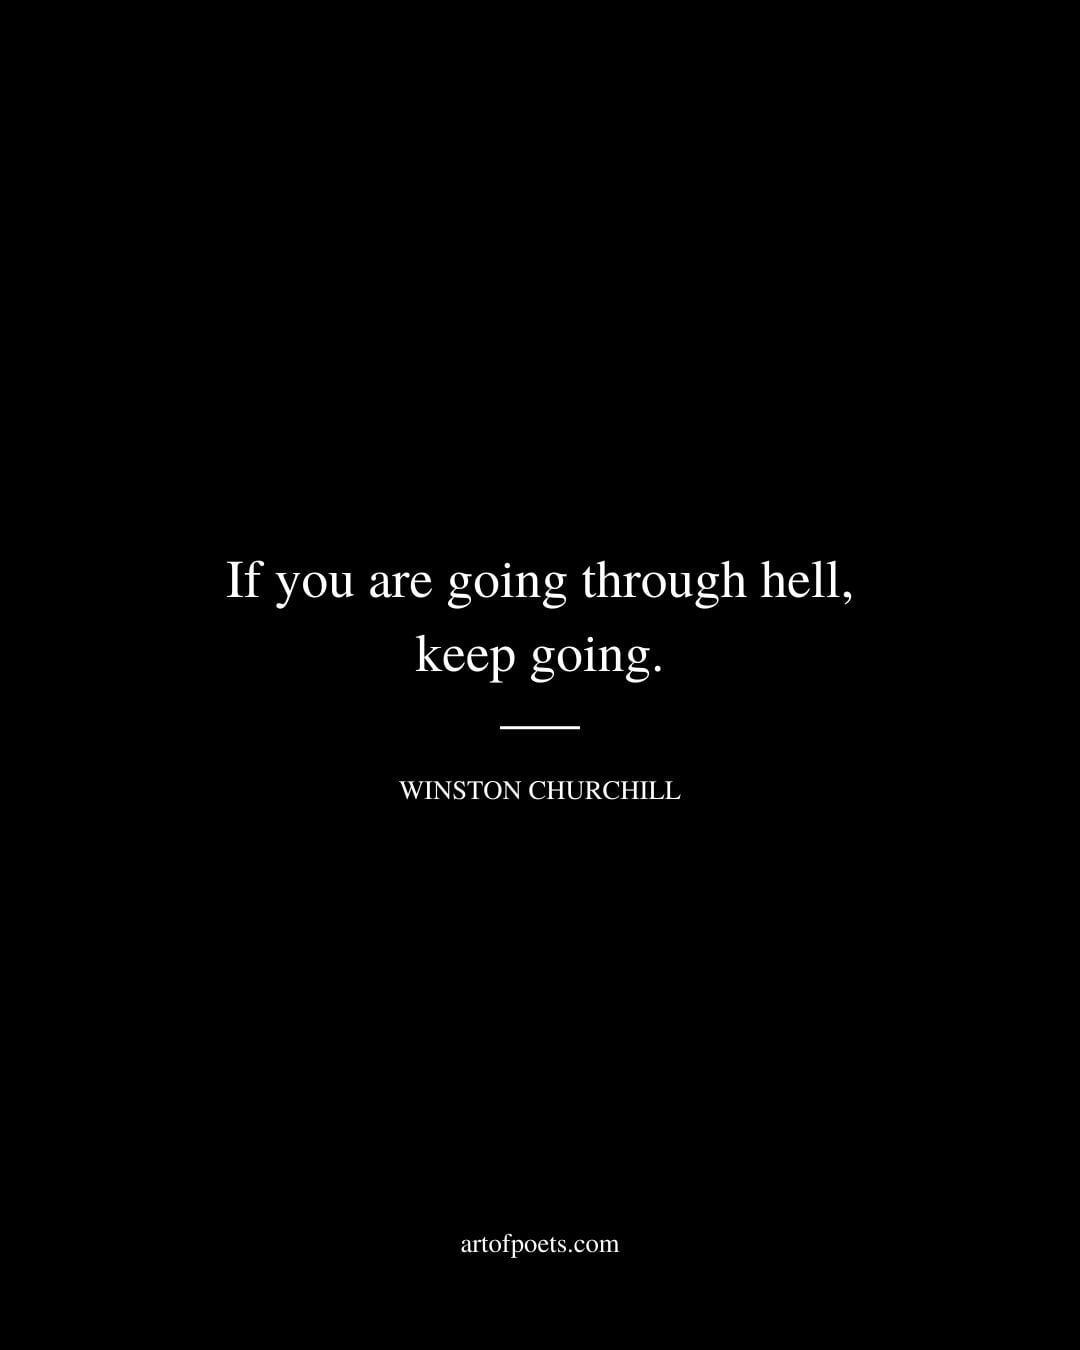 If you are going through hell keep going